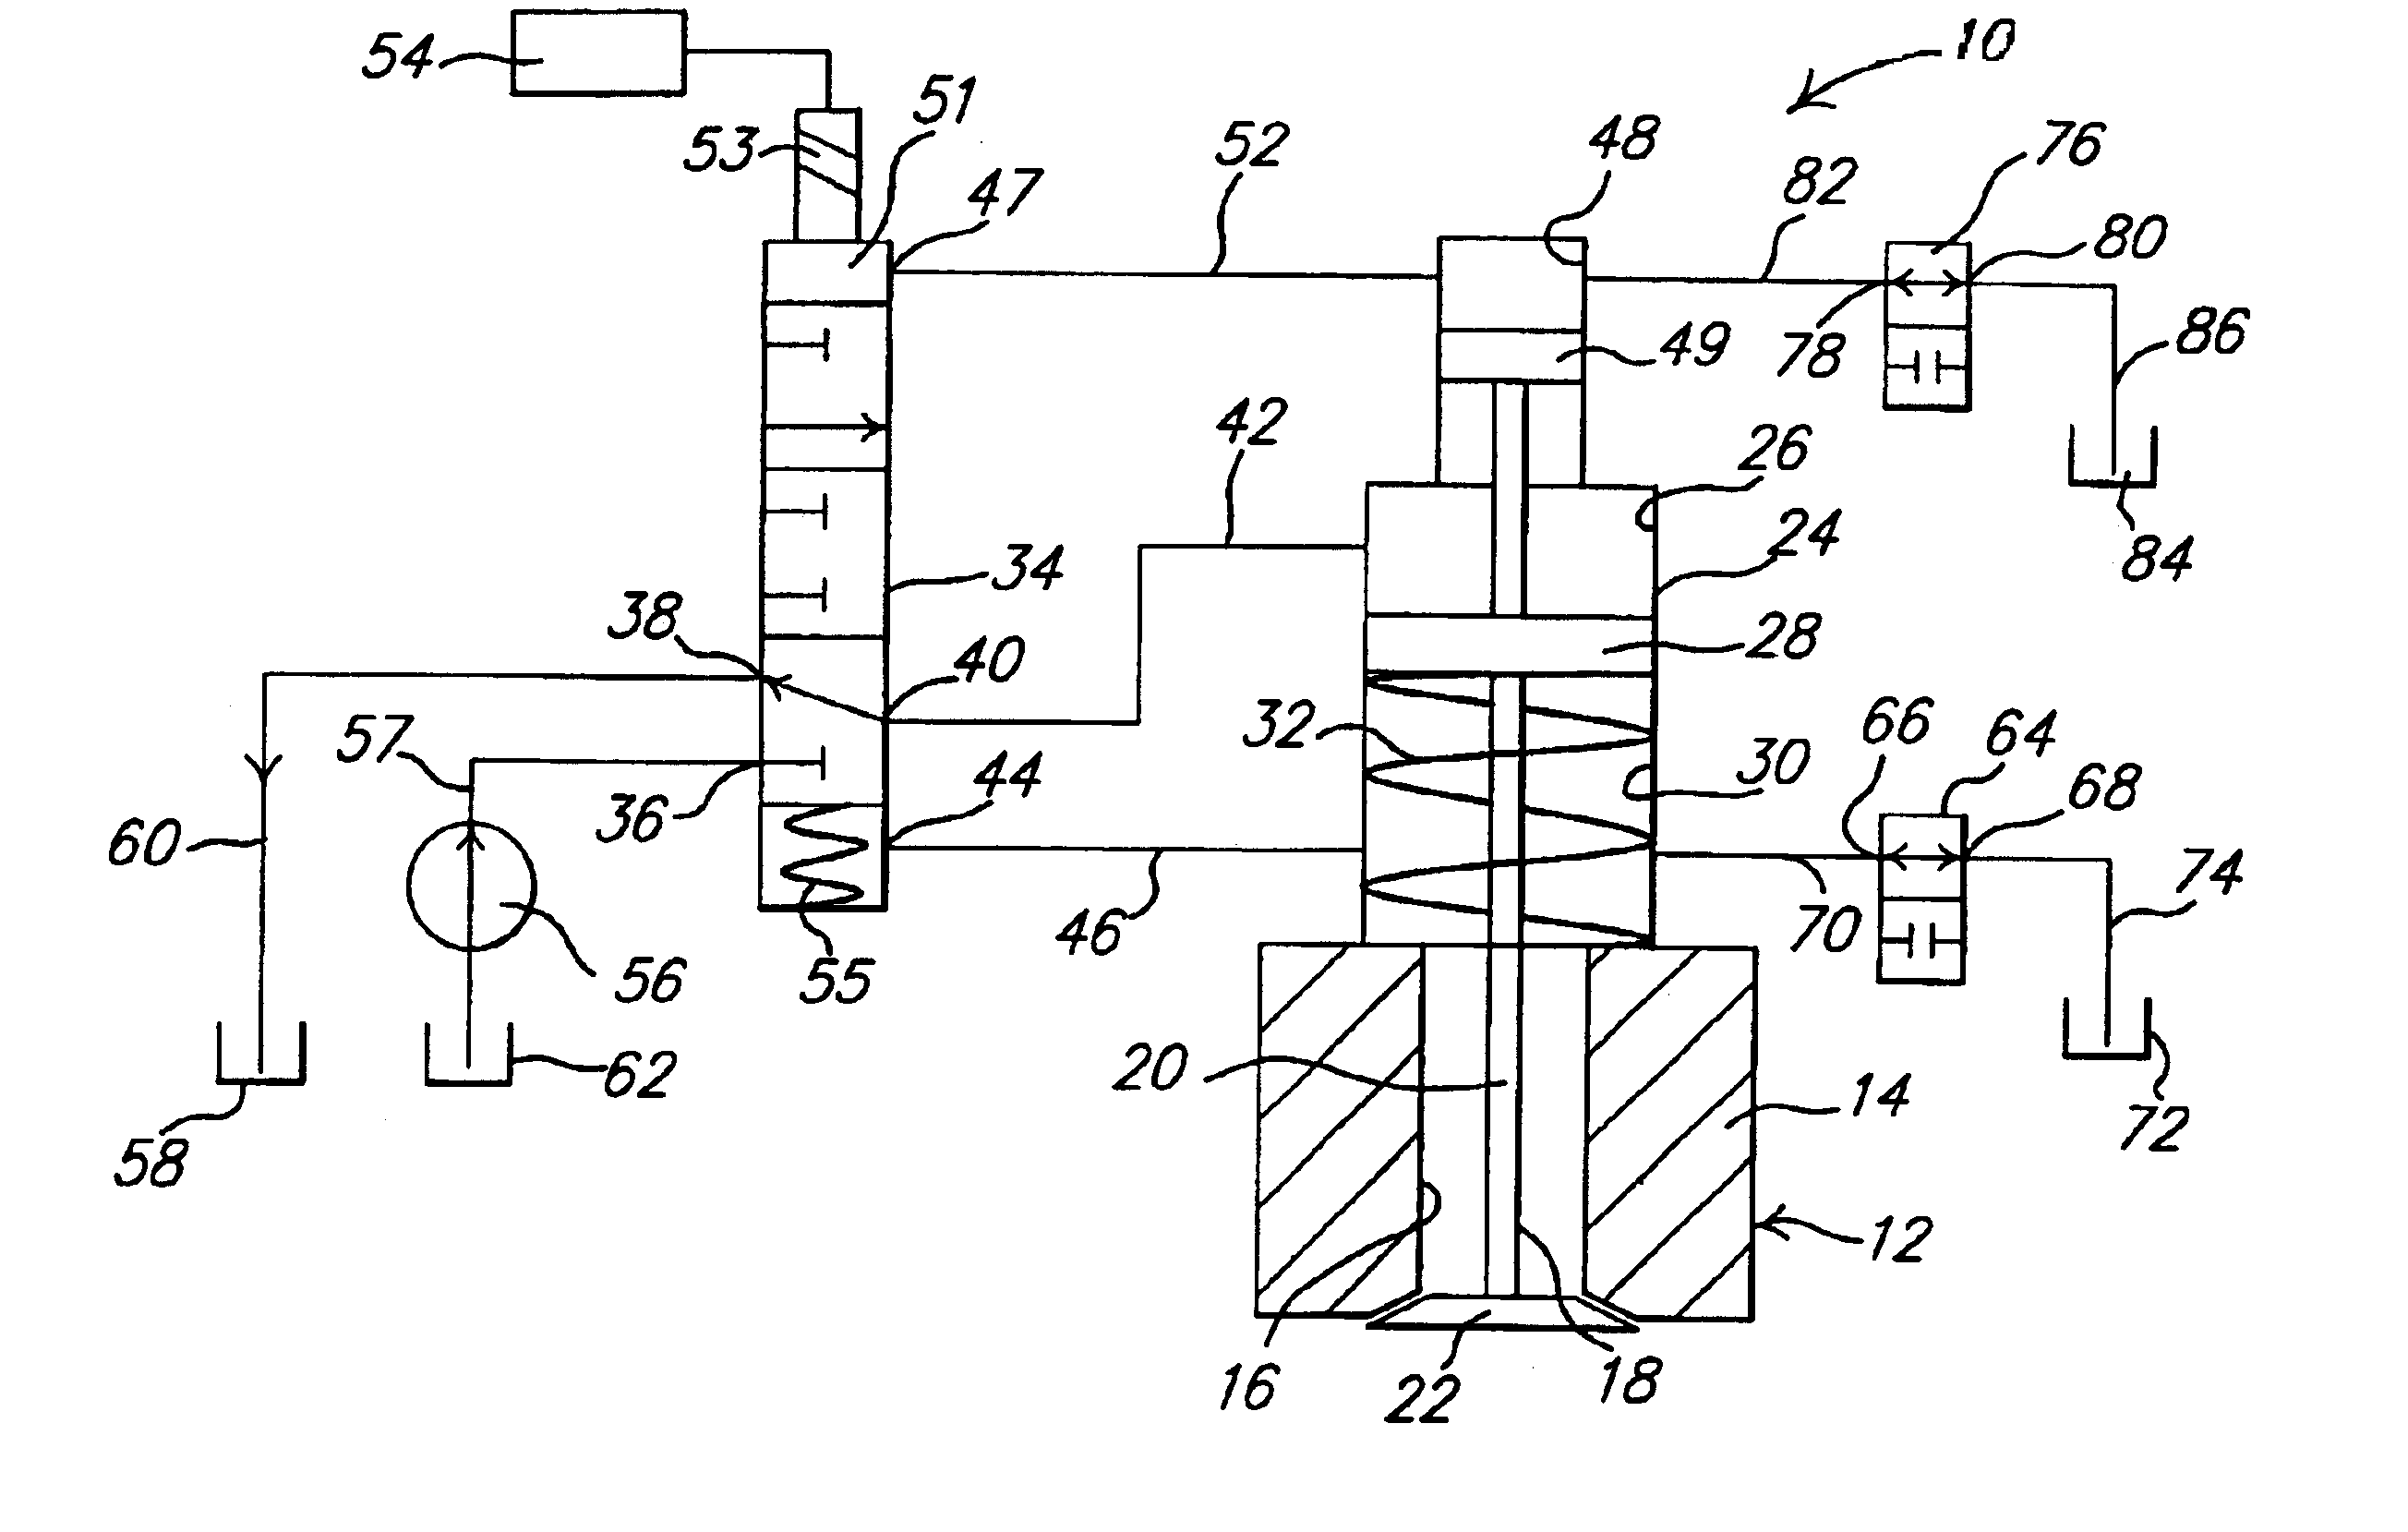 Engine valve actuator assembly with dual hydraulic feedback